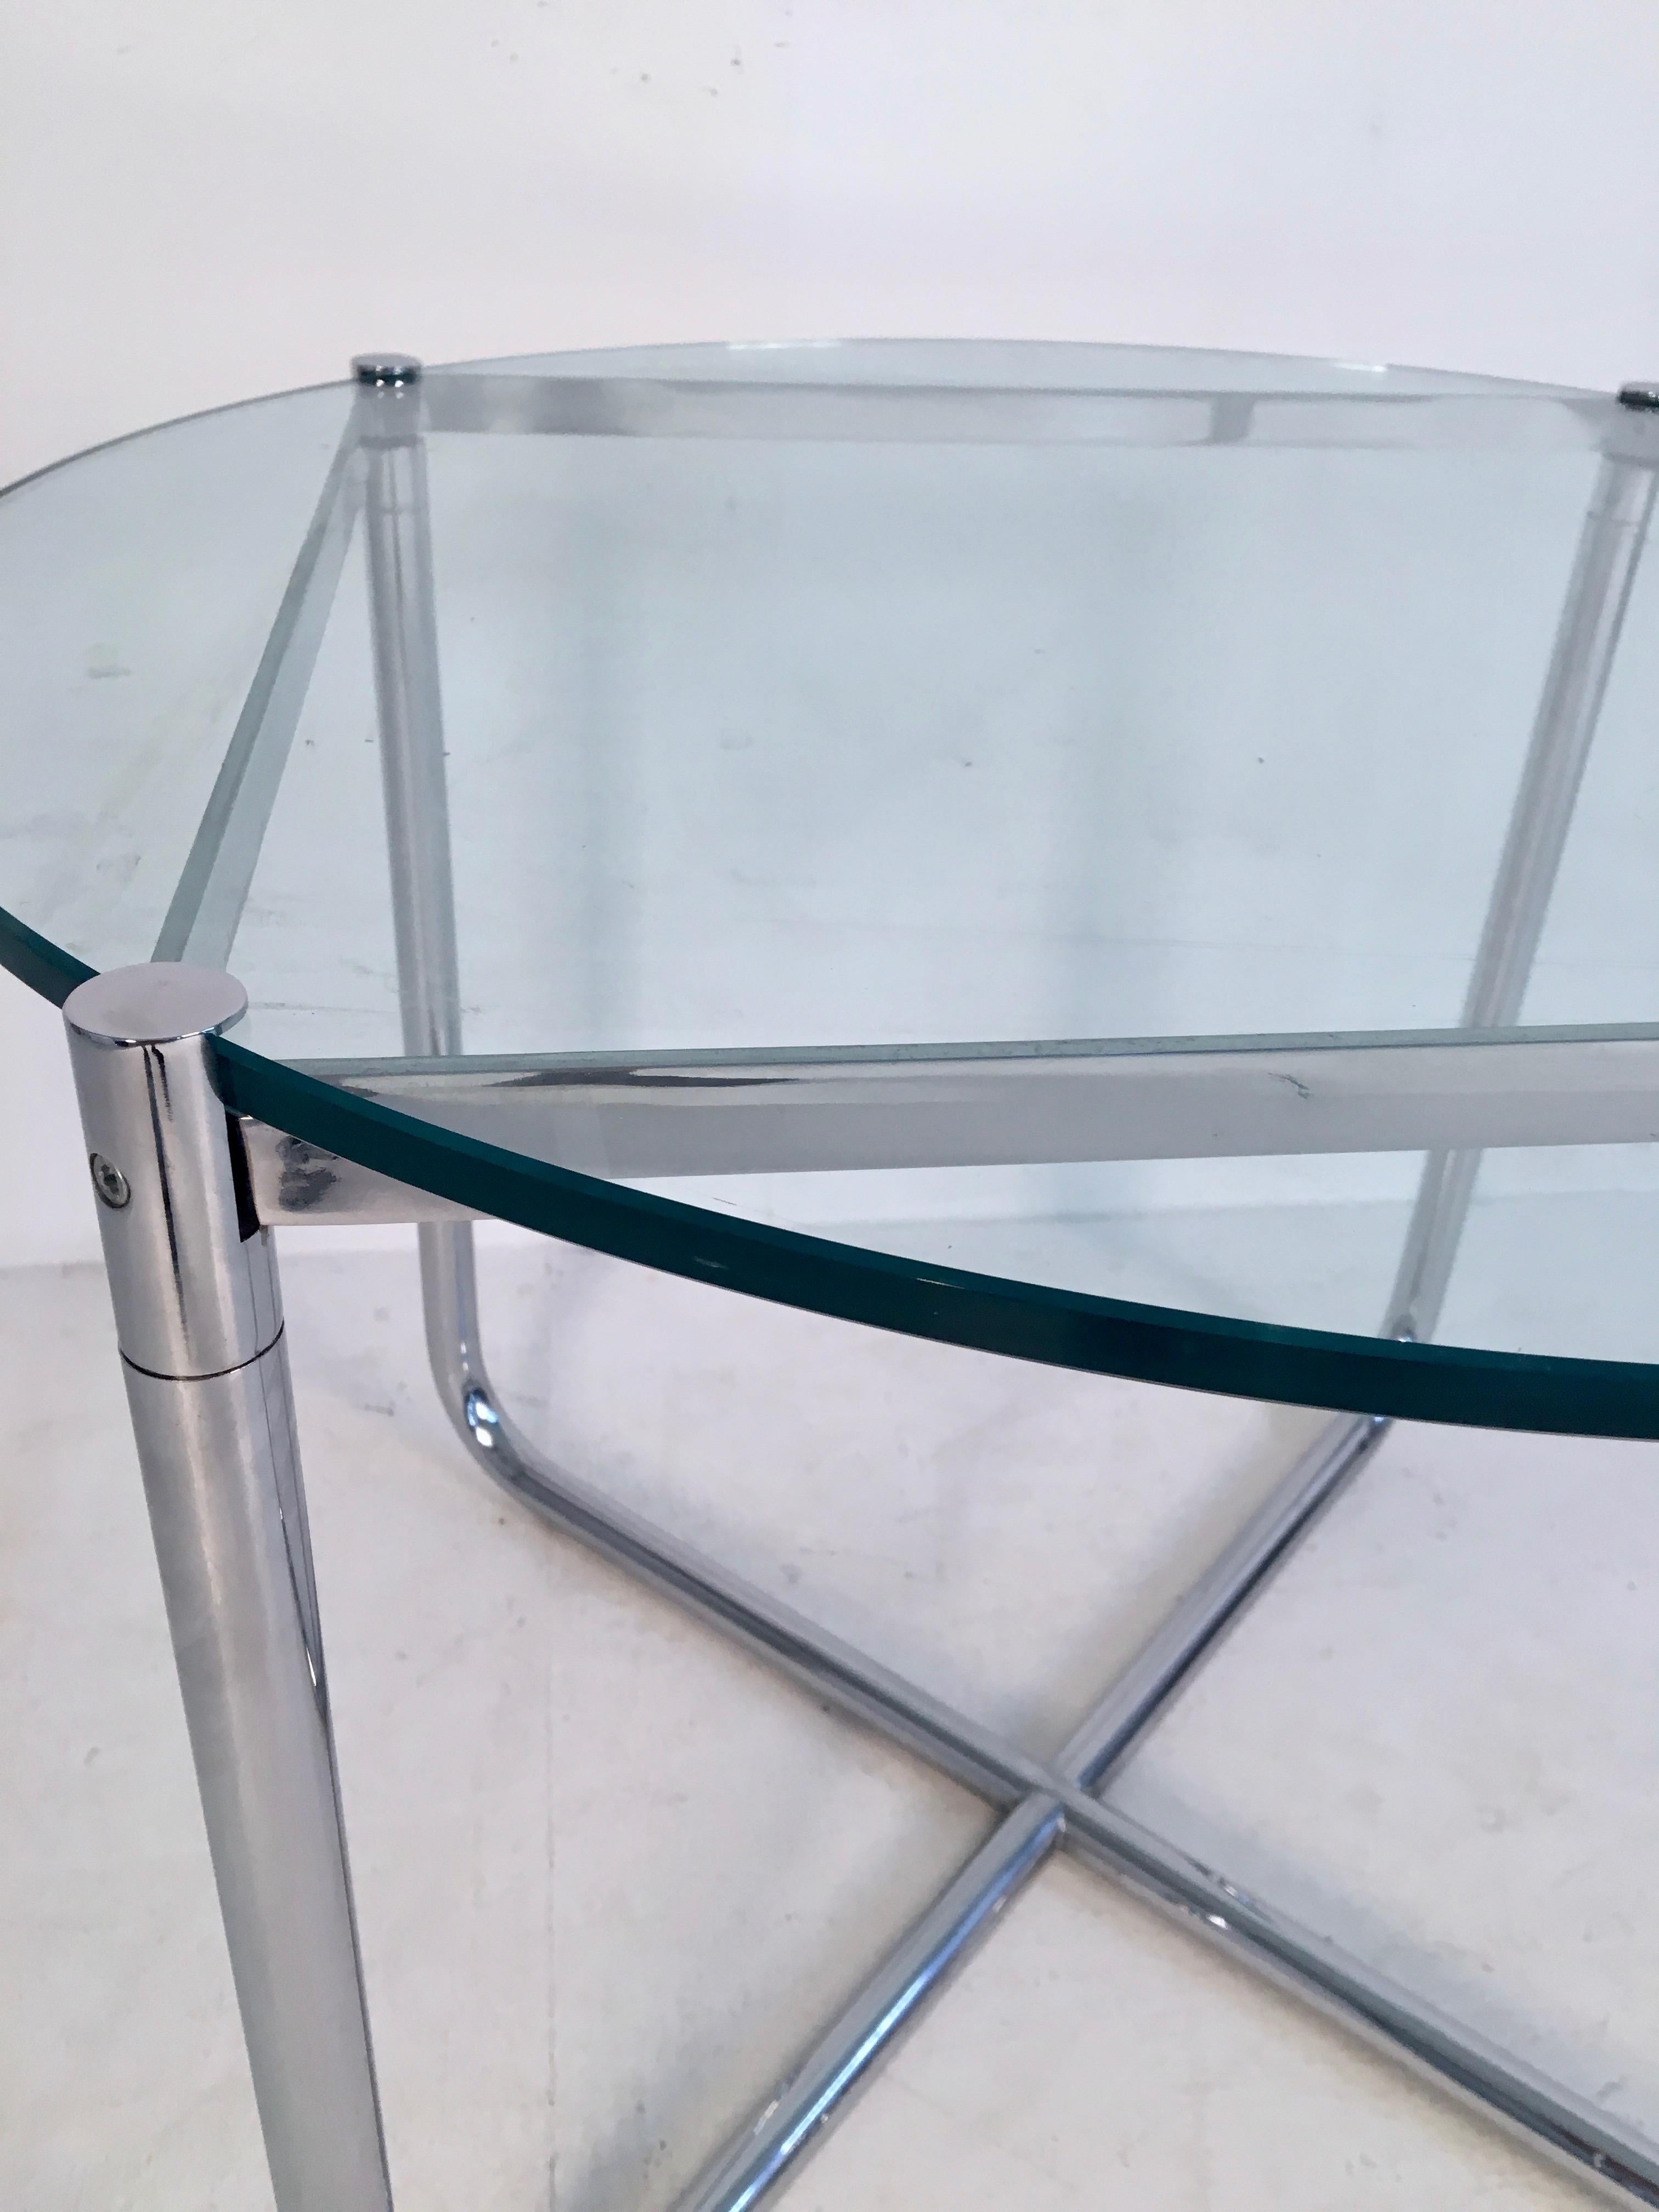 Plated Midcentury Glass and Chrome Side Table by Mies van der Rohe for Knoll circa 1970 For Sale